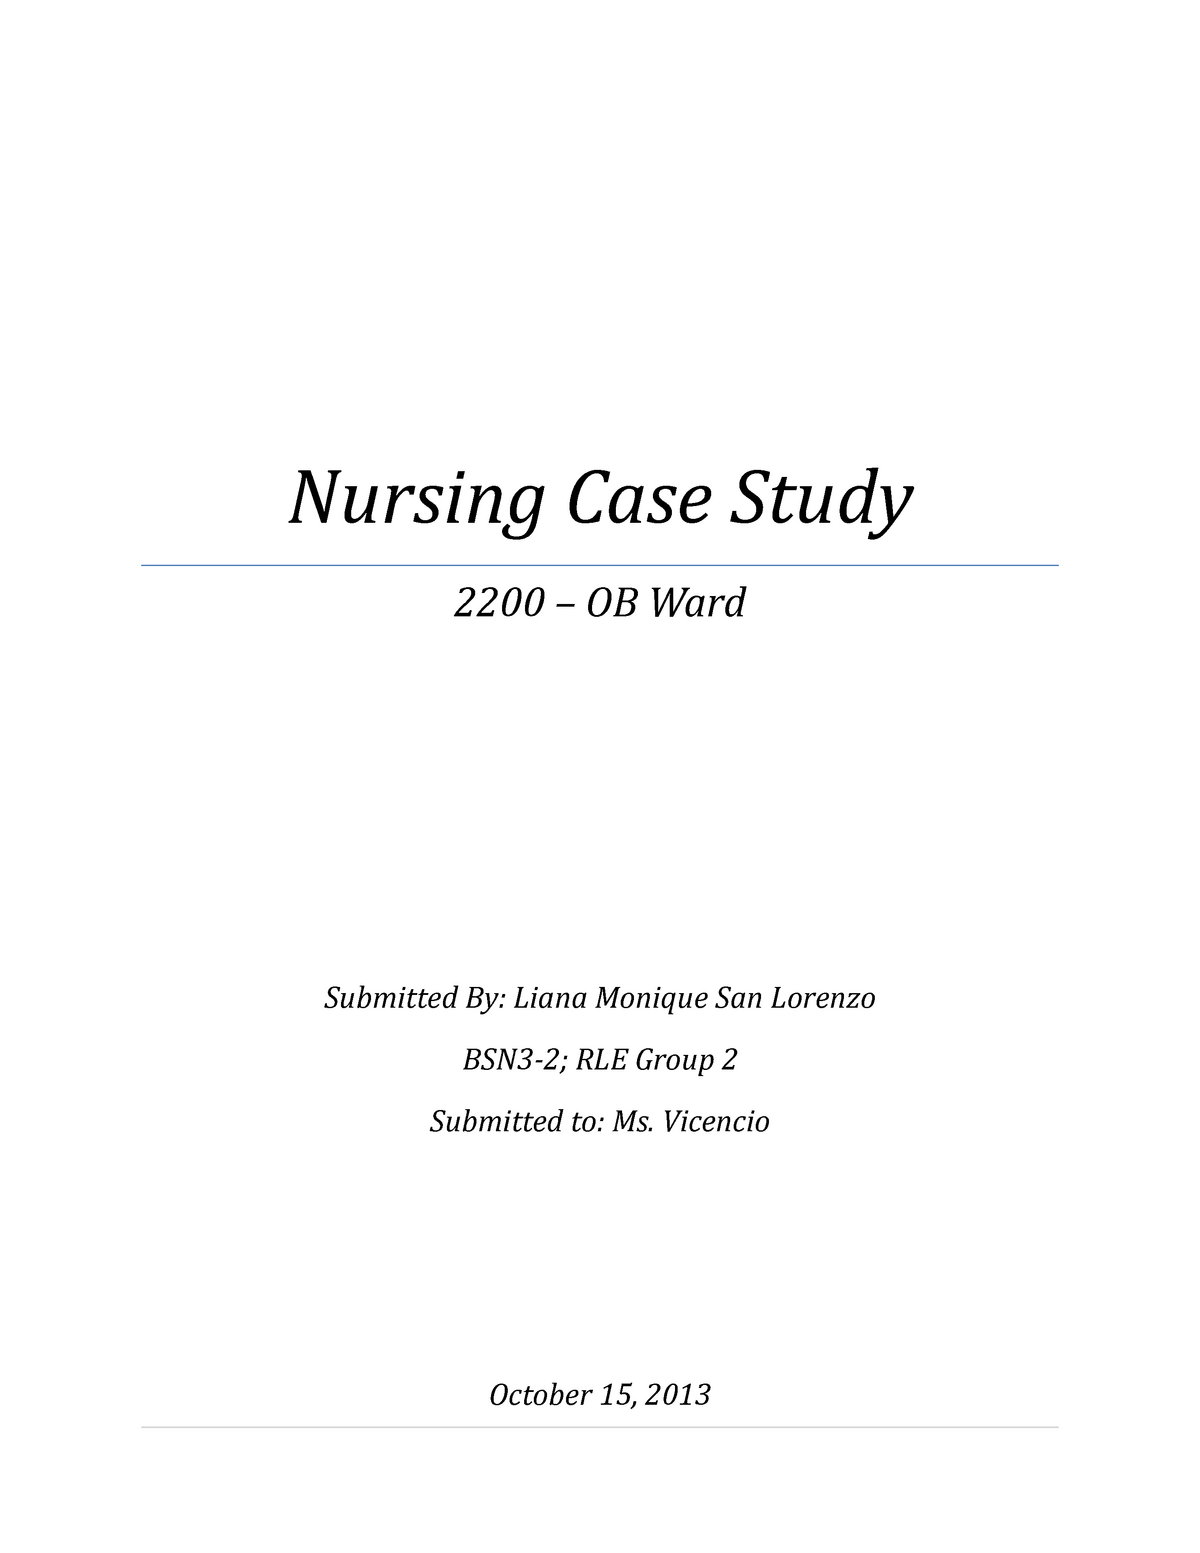 how to present a case study in nursing